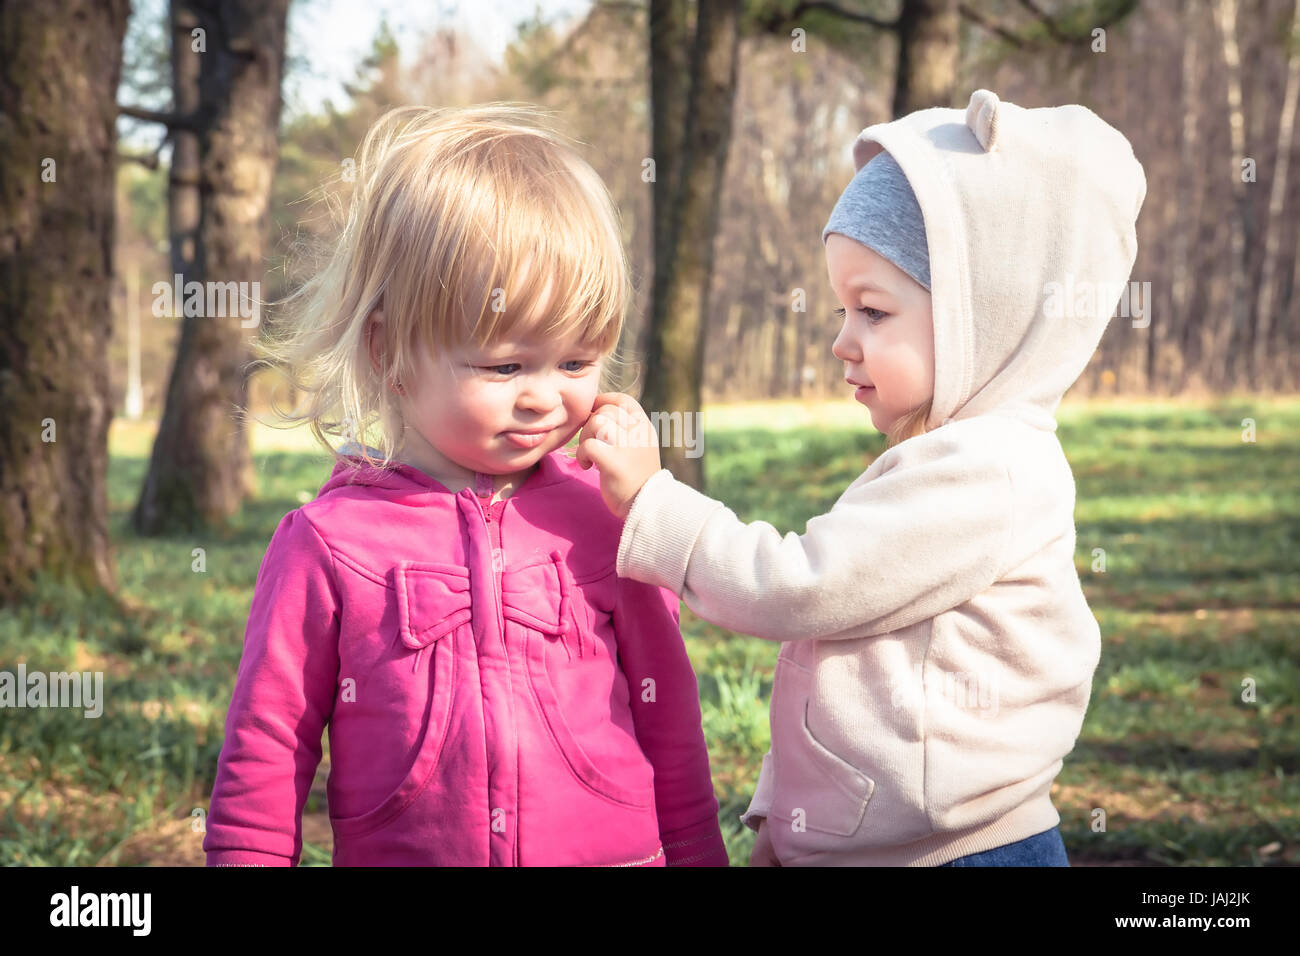 Two cute baby girls playing together in park symbolizing children friendship and childhood Stock Photo